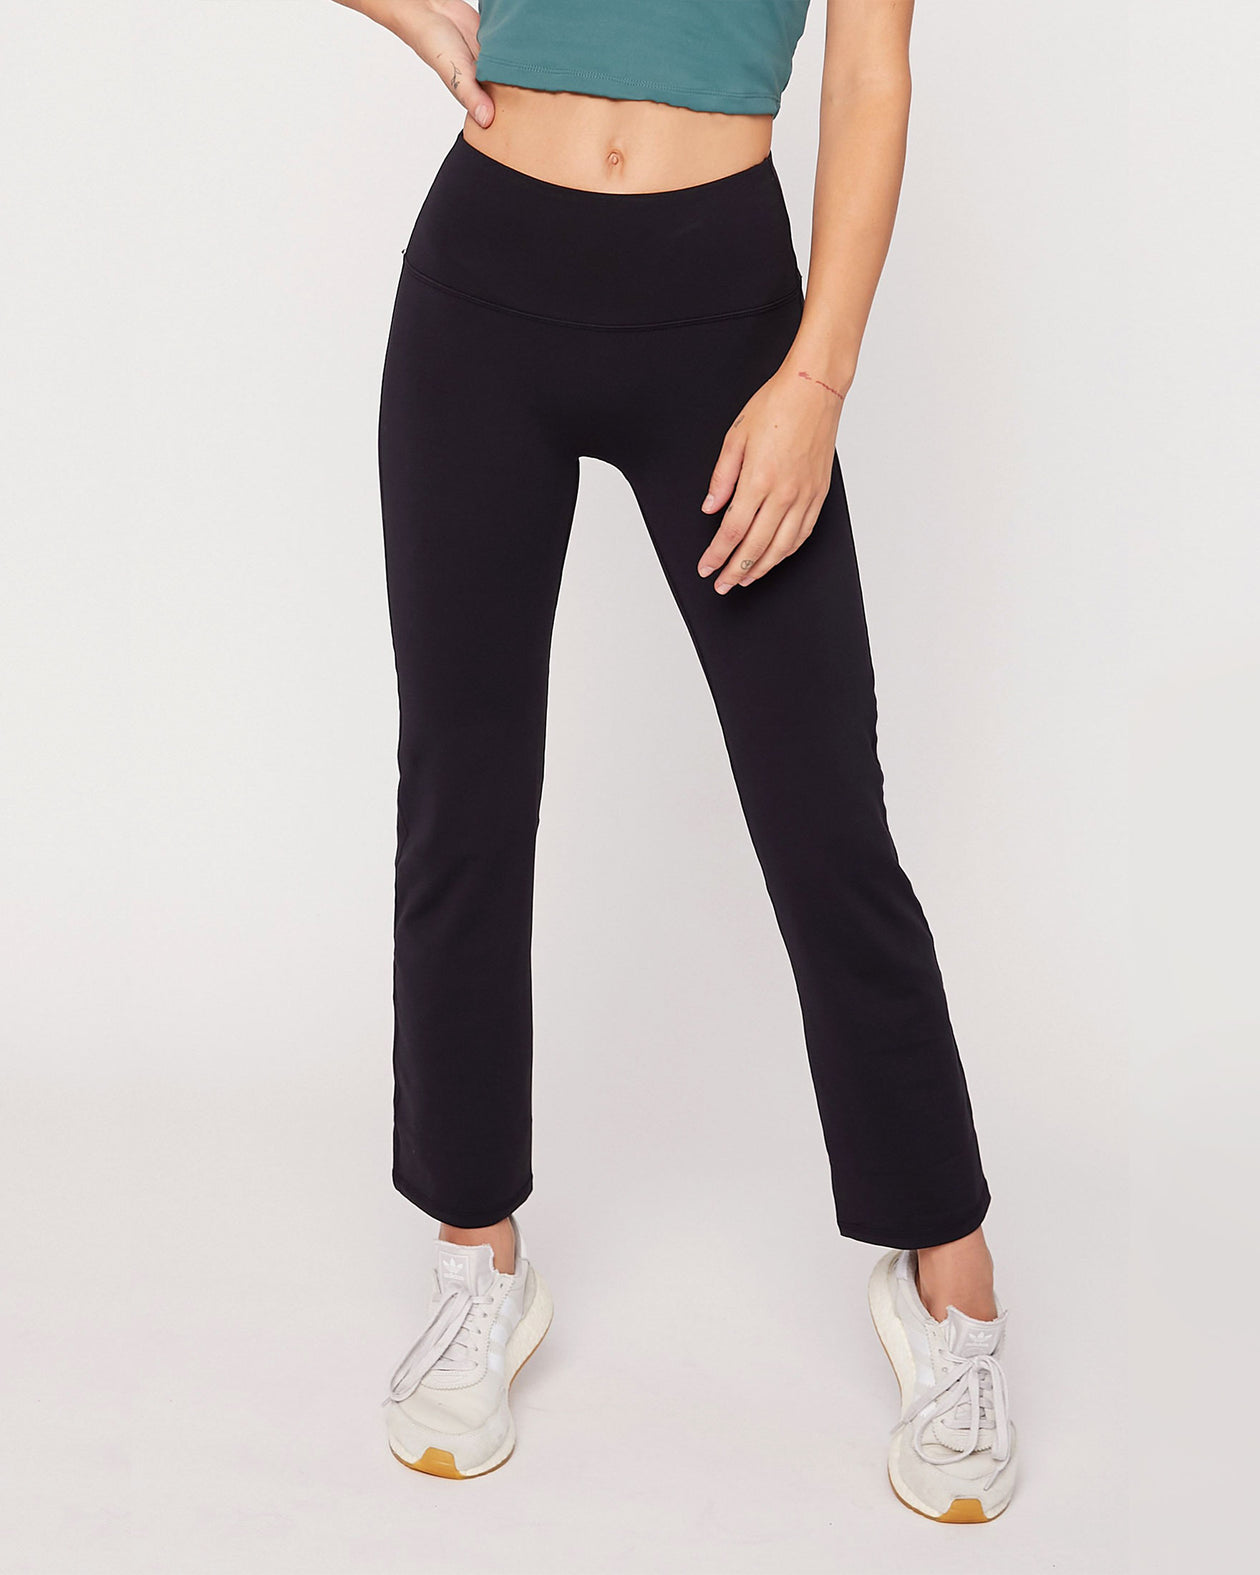 Black Bootcut Yoga Pants With Pockets For Women High Stretch